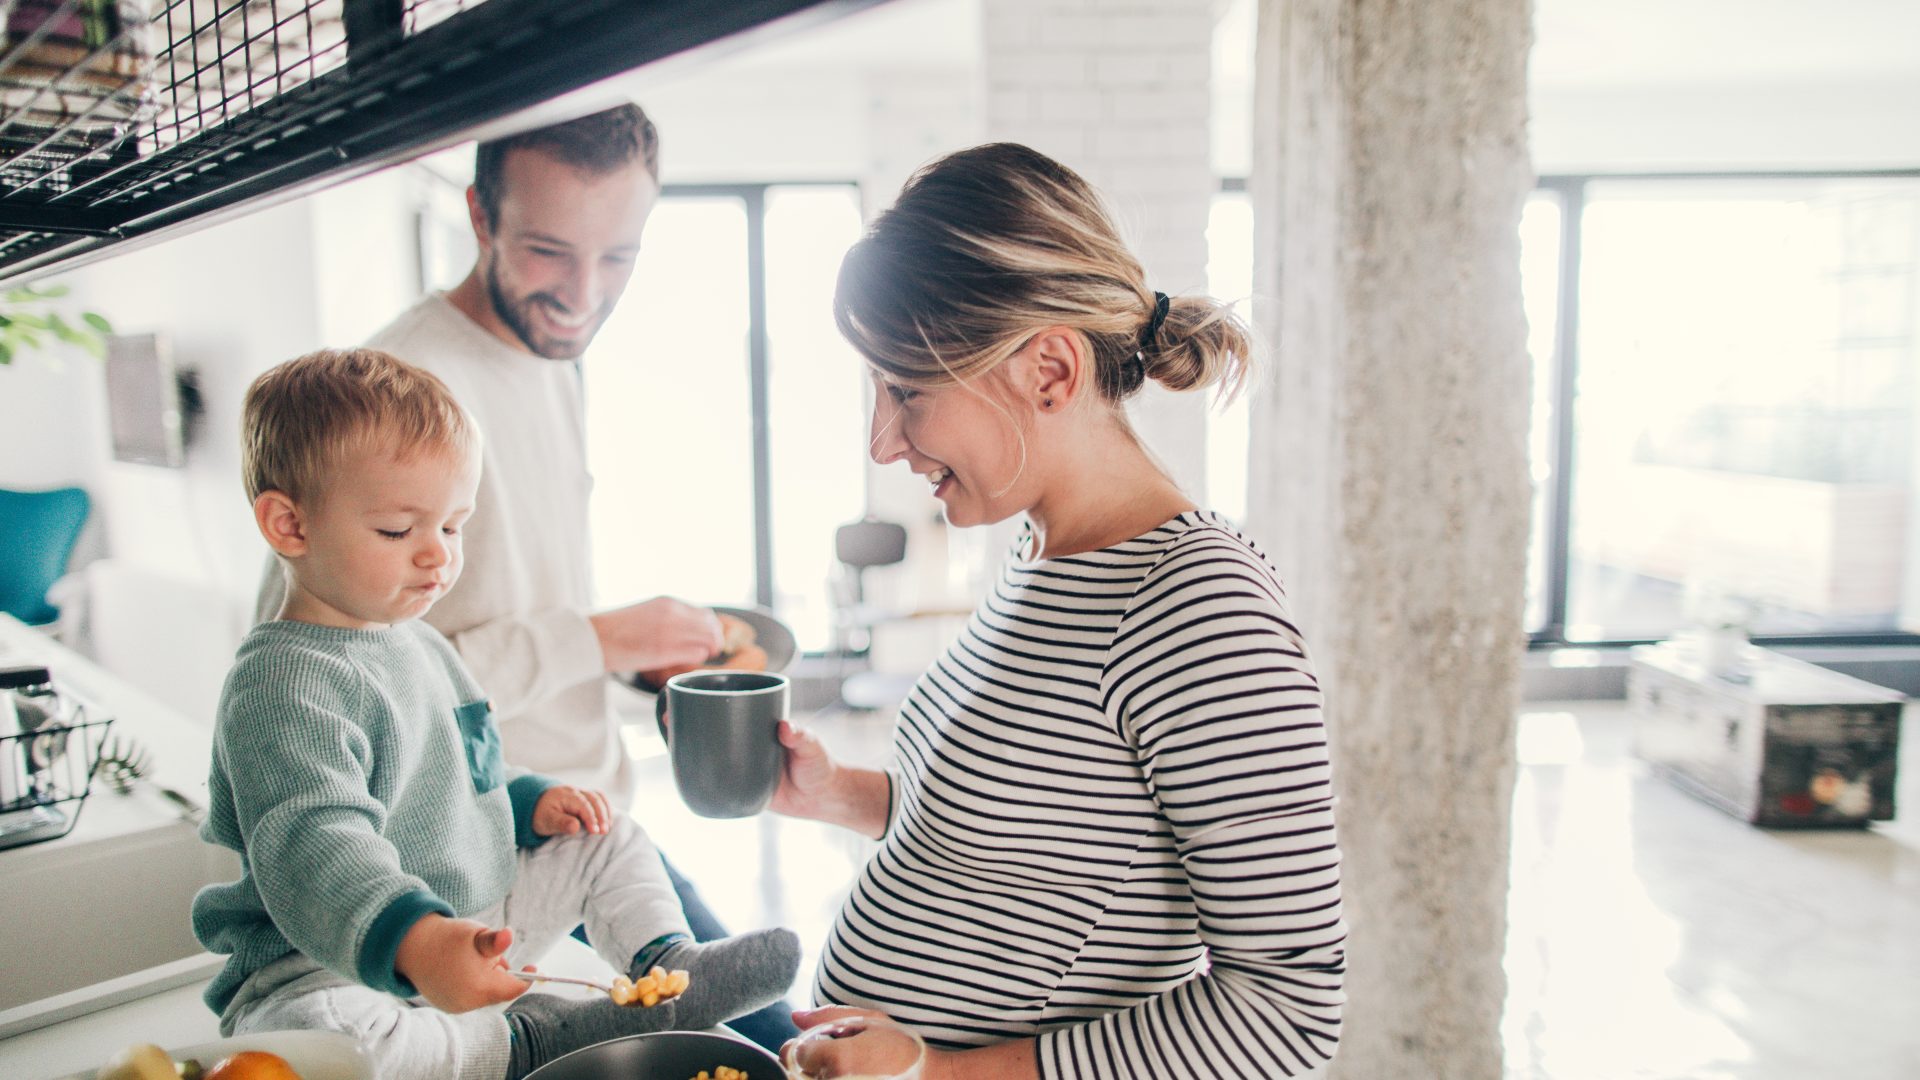 Photo of a young family preparing breakfast together in their kitchen